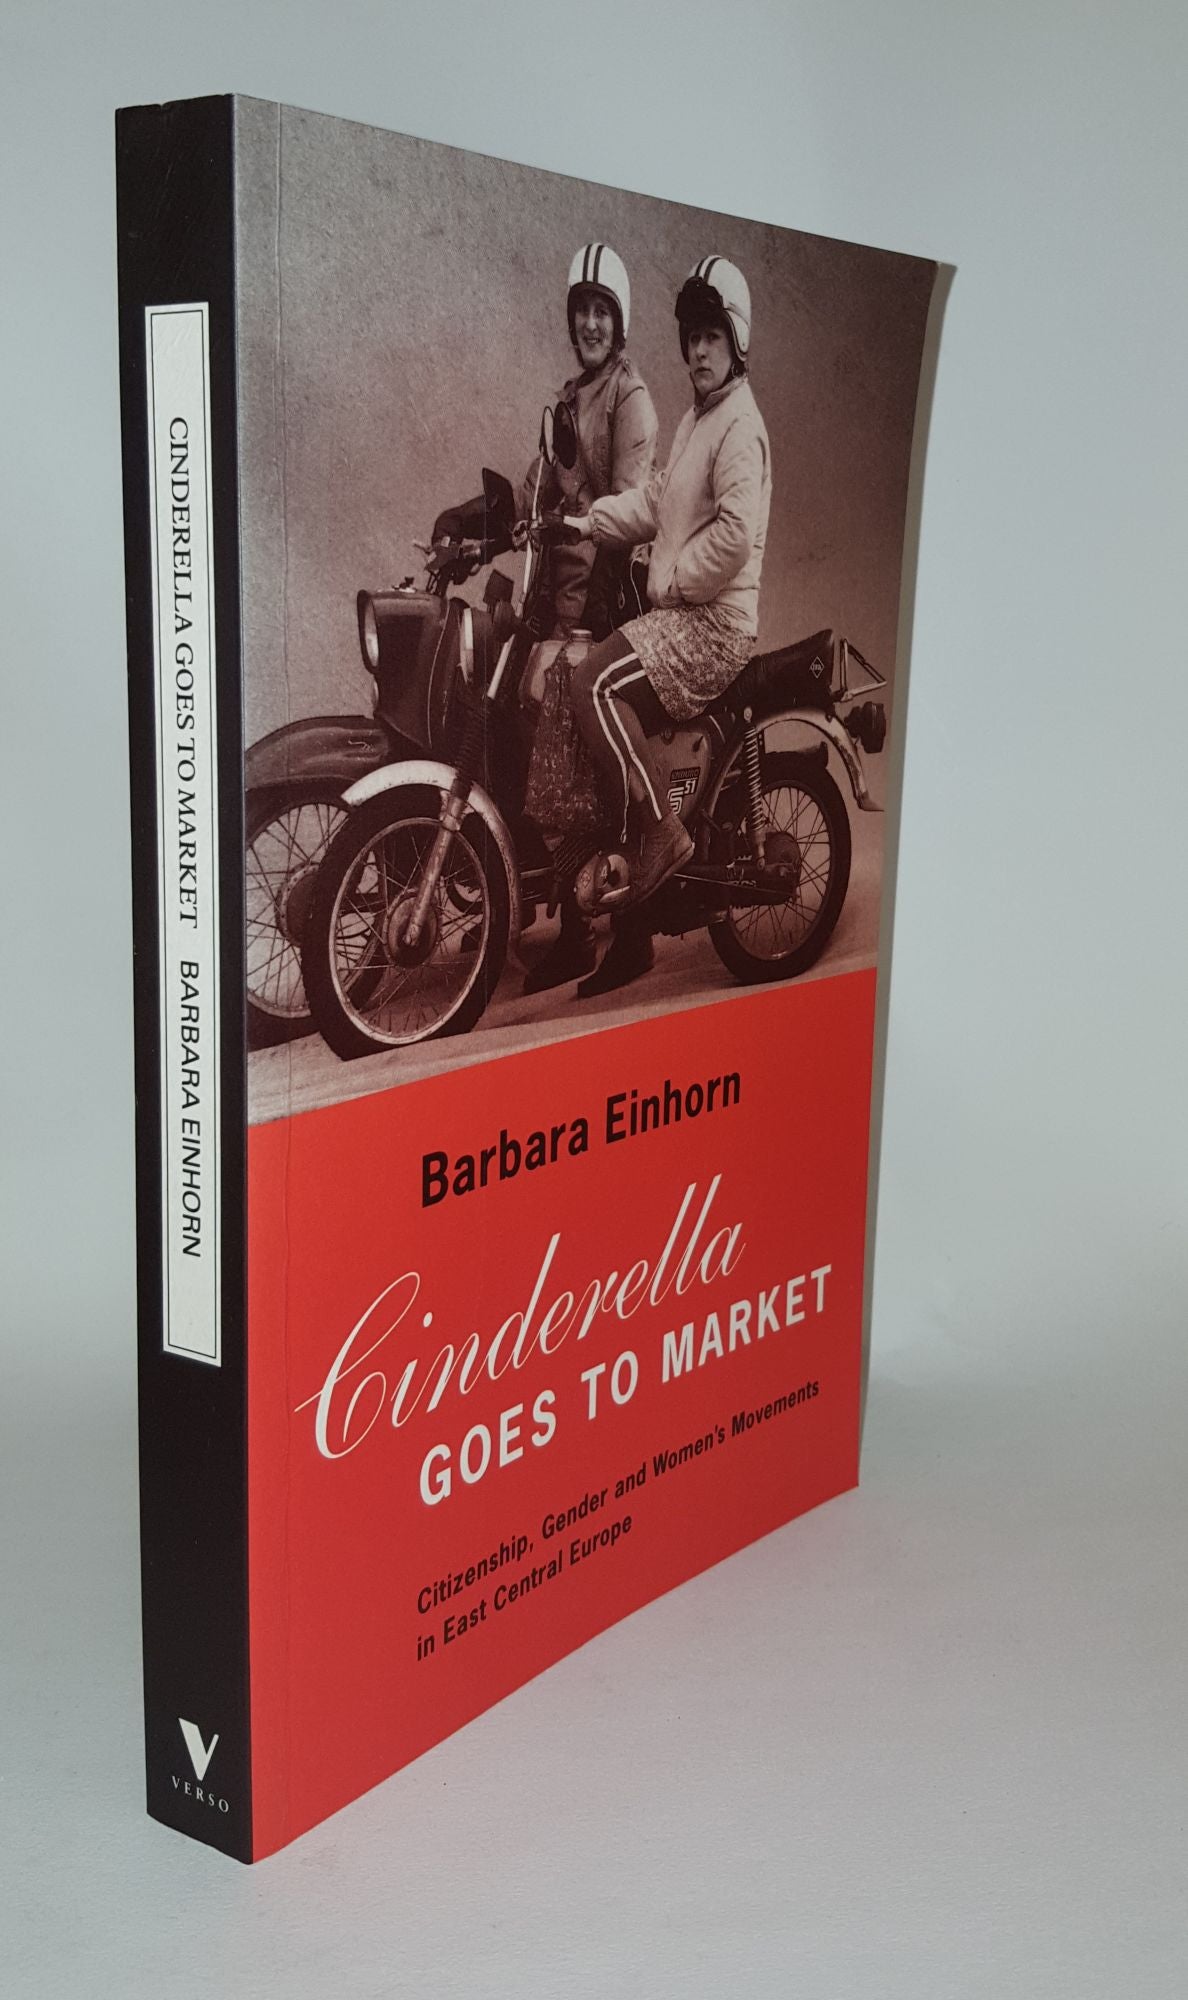 EINHORN Barbara - Cinderella Goes to Market Citizenship Gender and the Women's Movements in East Central Europe